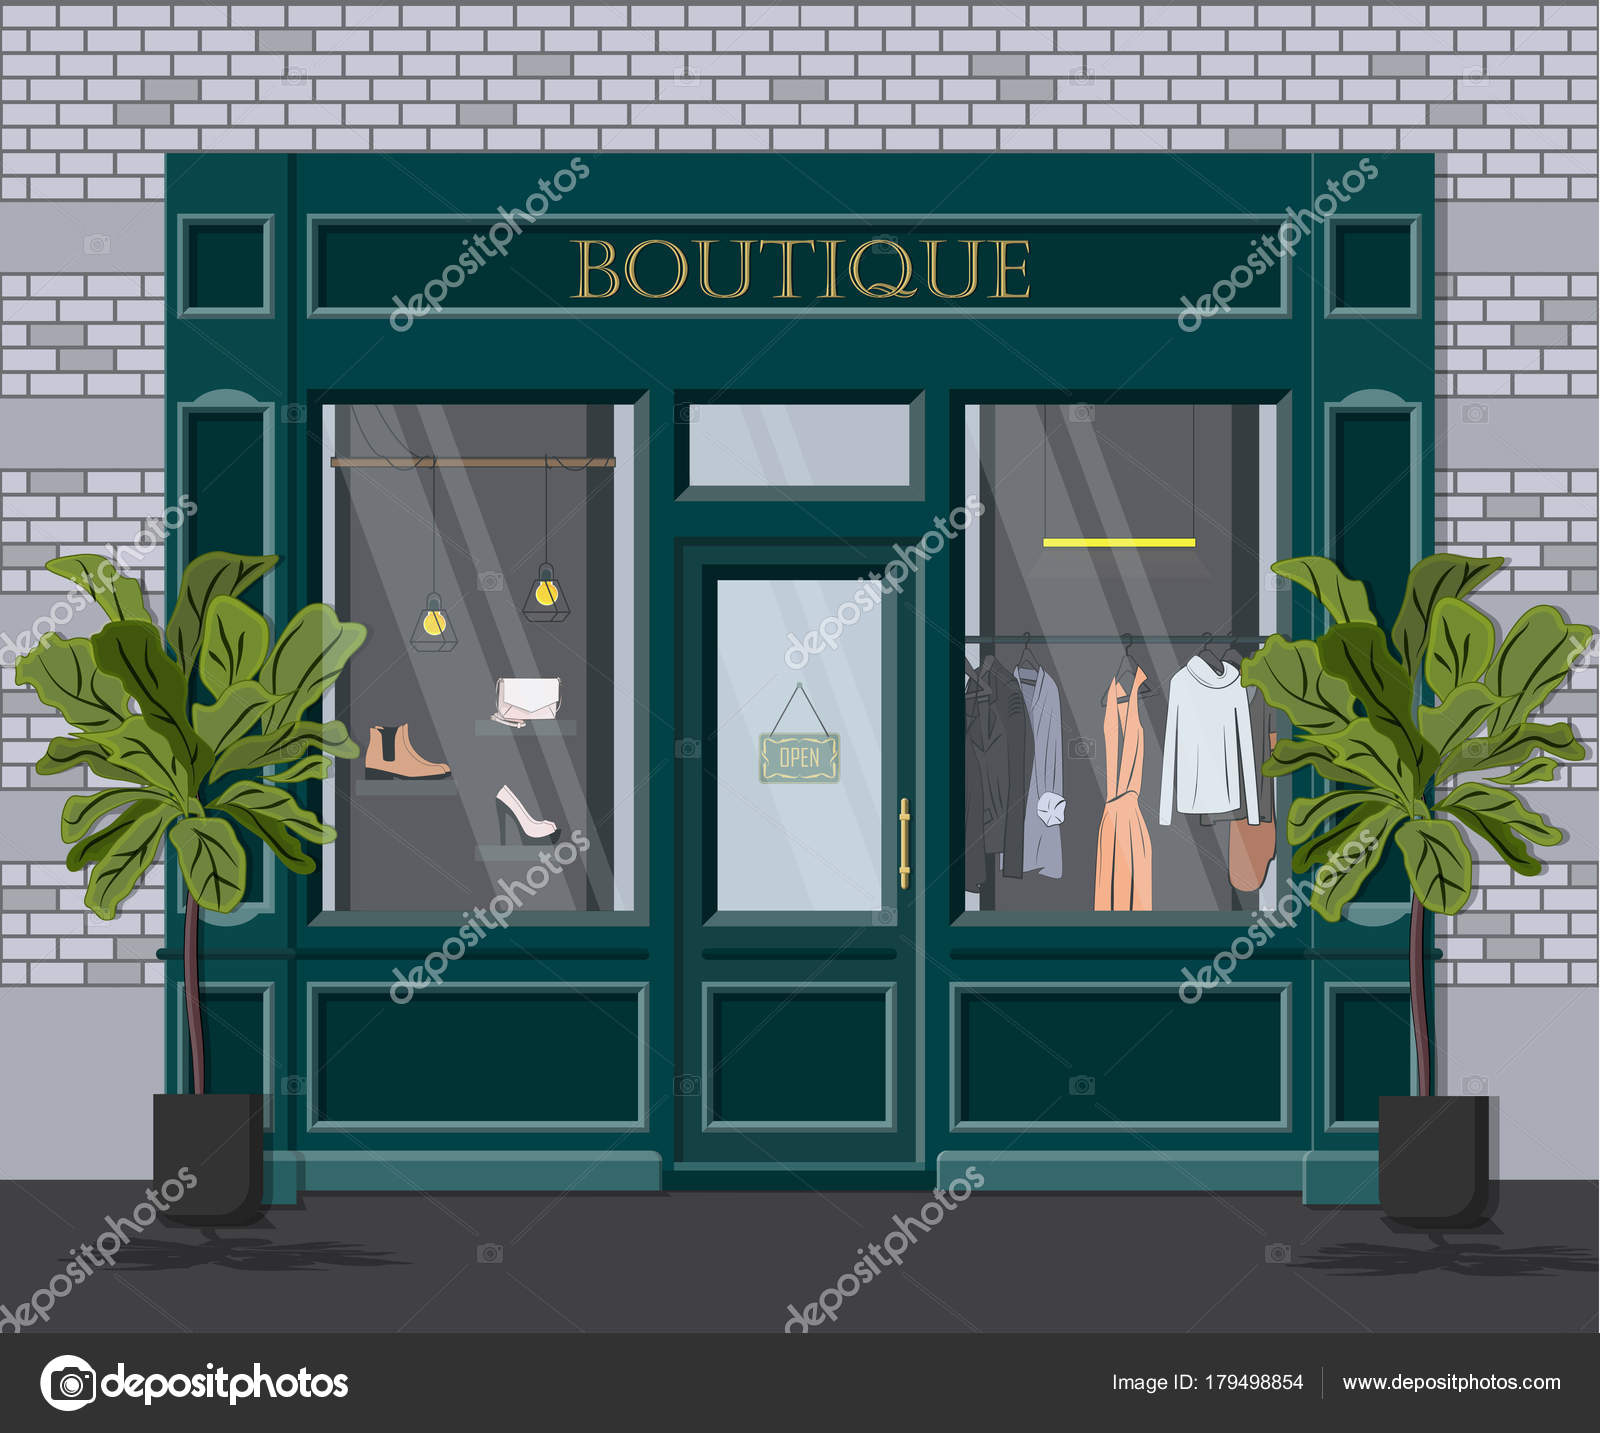 Graphic vector facade vintage boutique. Detailed Illustration of a